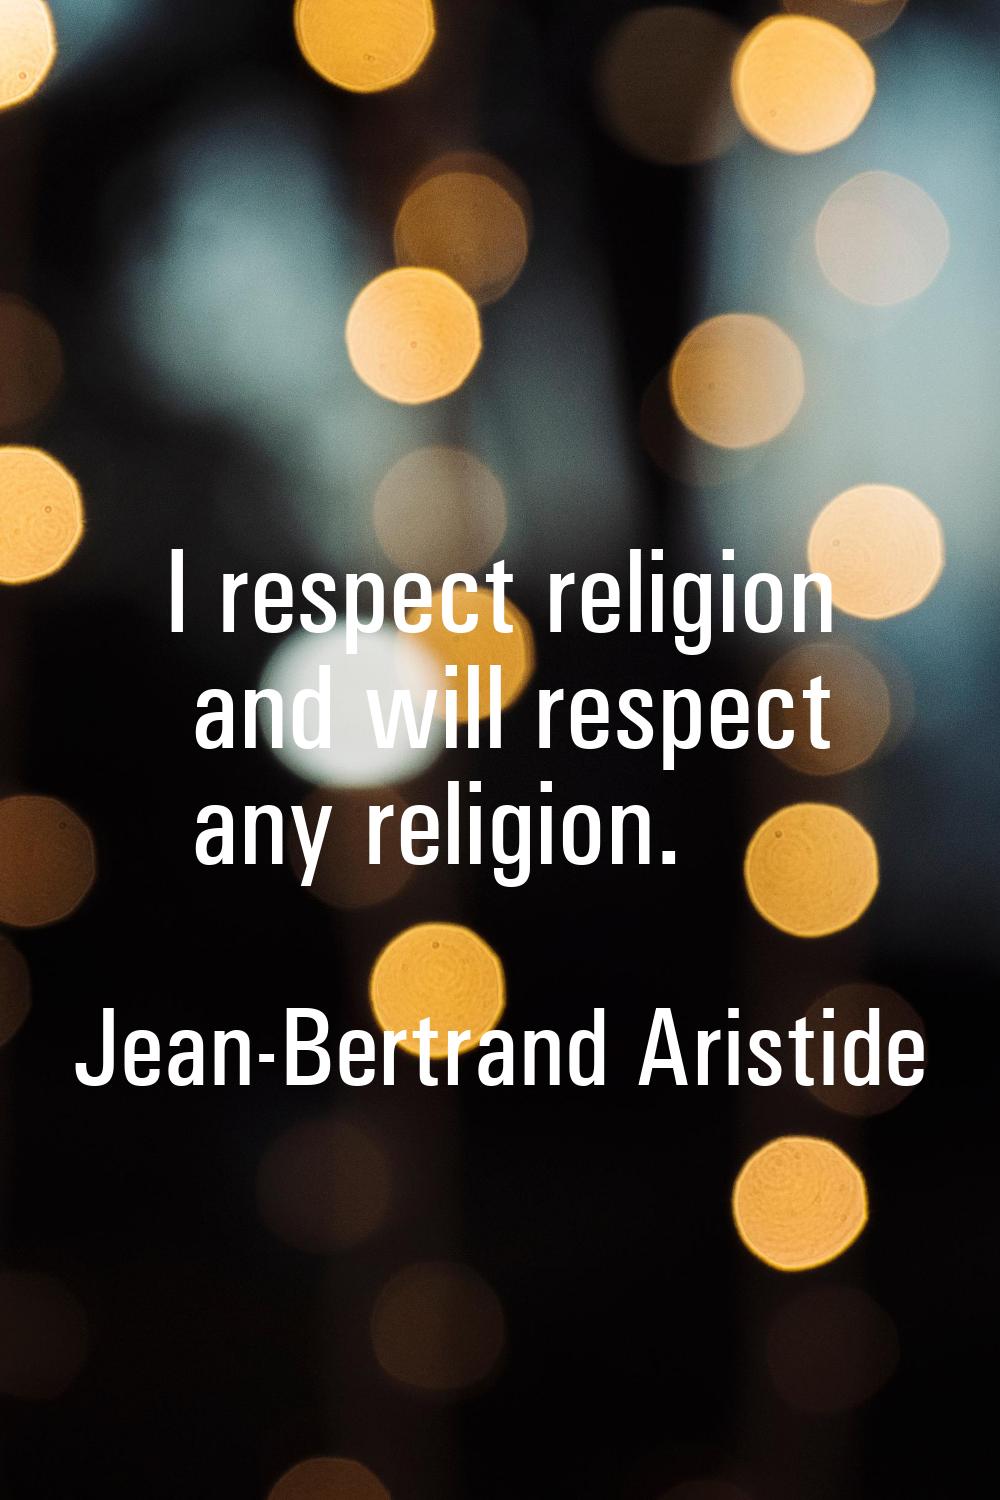 I respect religion and will respect any religion.